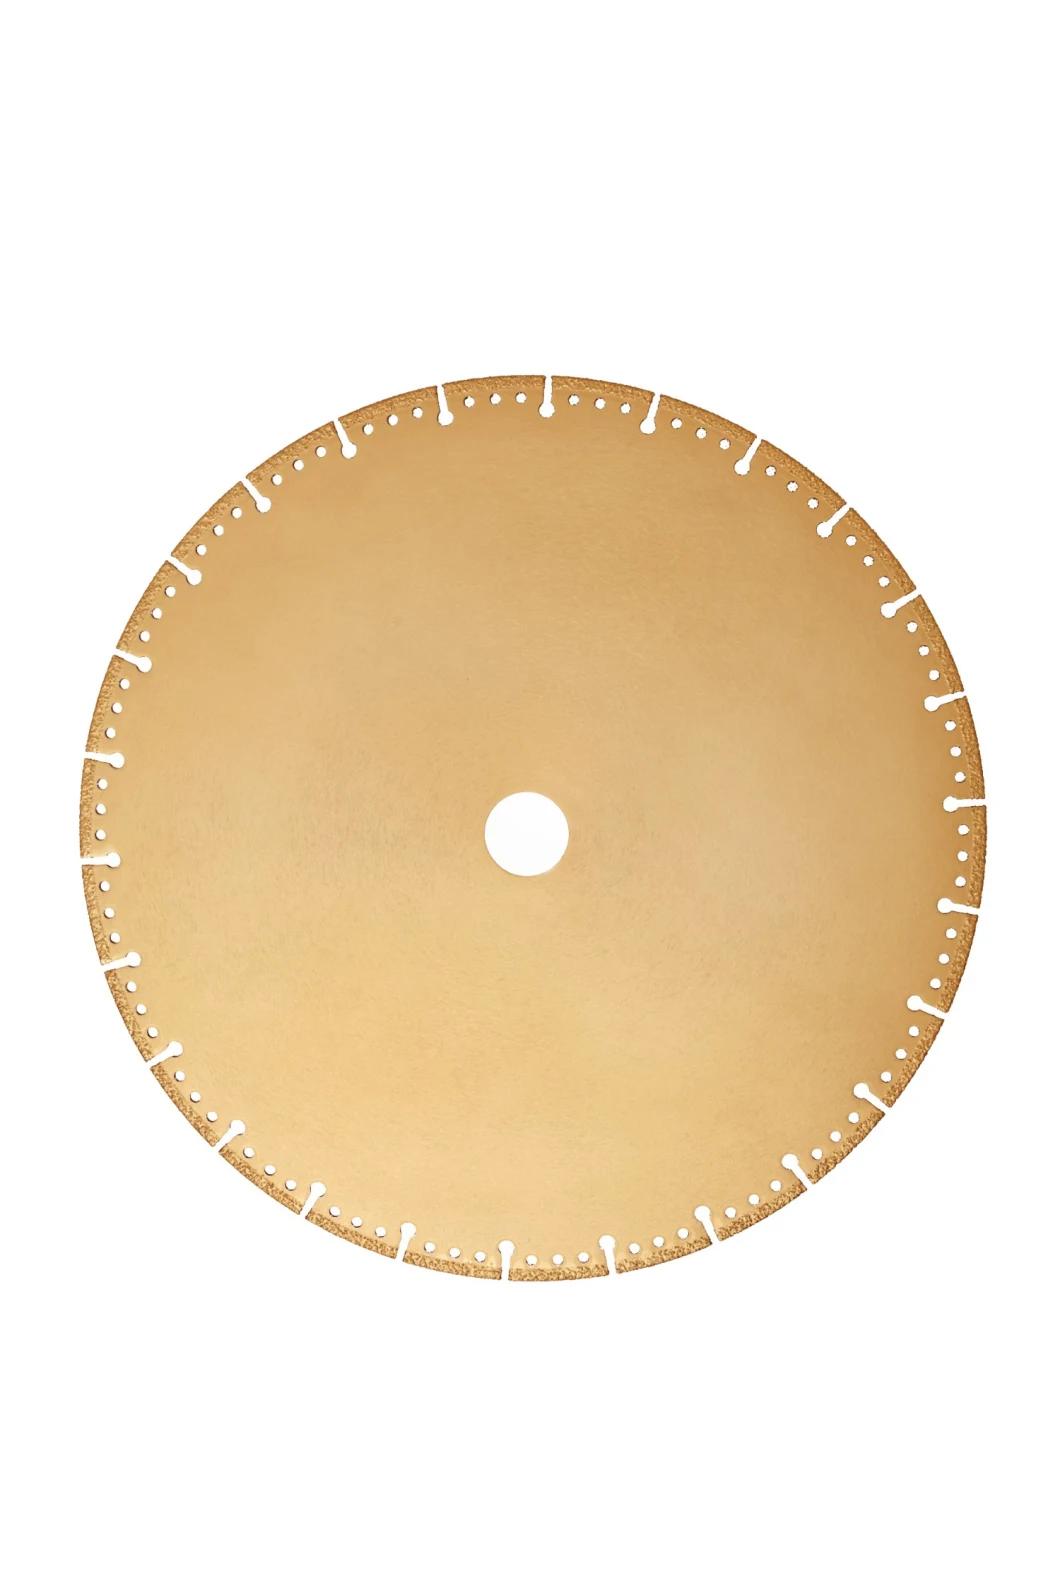 4inch-16inch Diamond Cutting and Grinding Disc Saw Blade for Steel Pipe and Casting Cutting